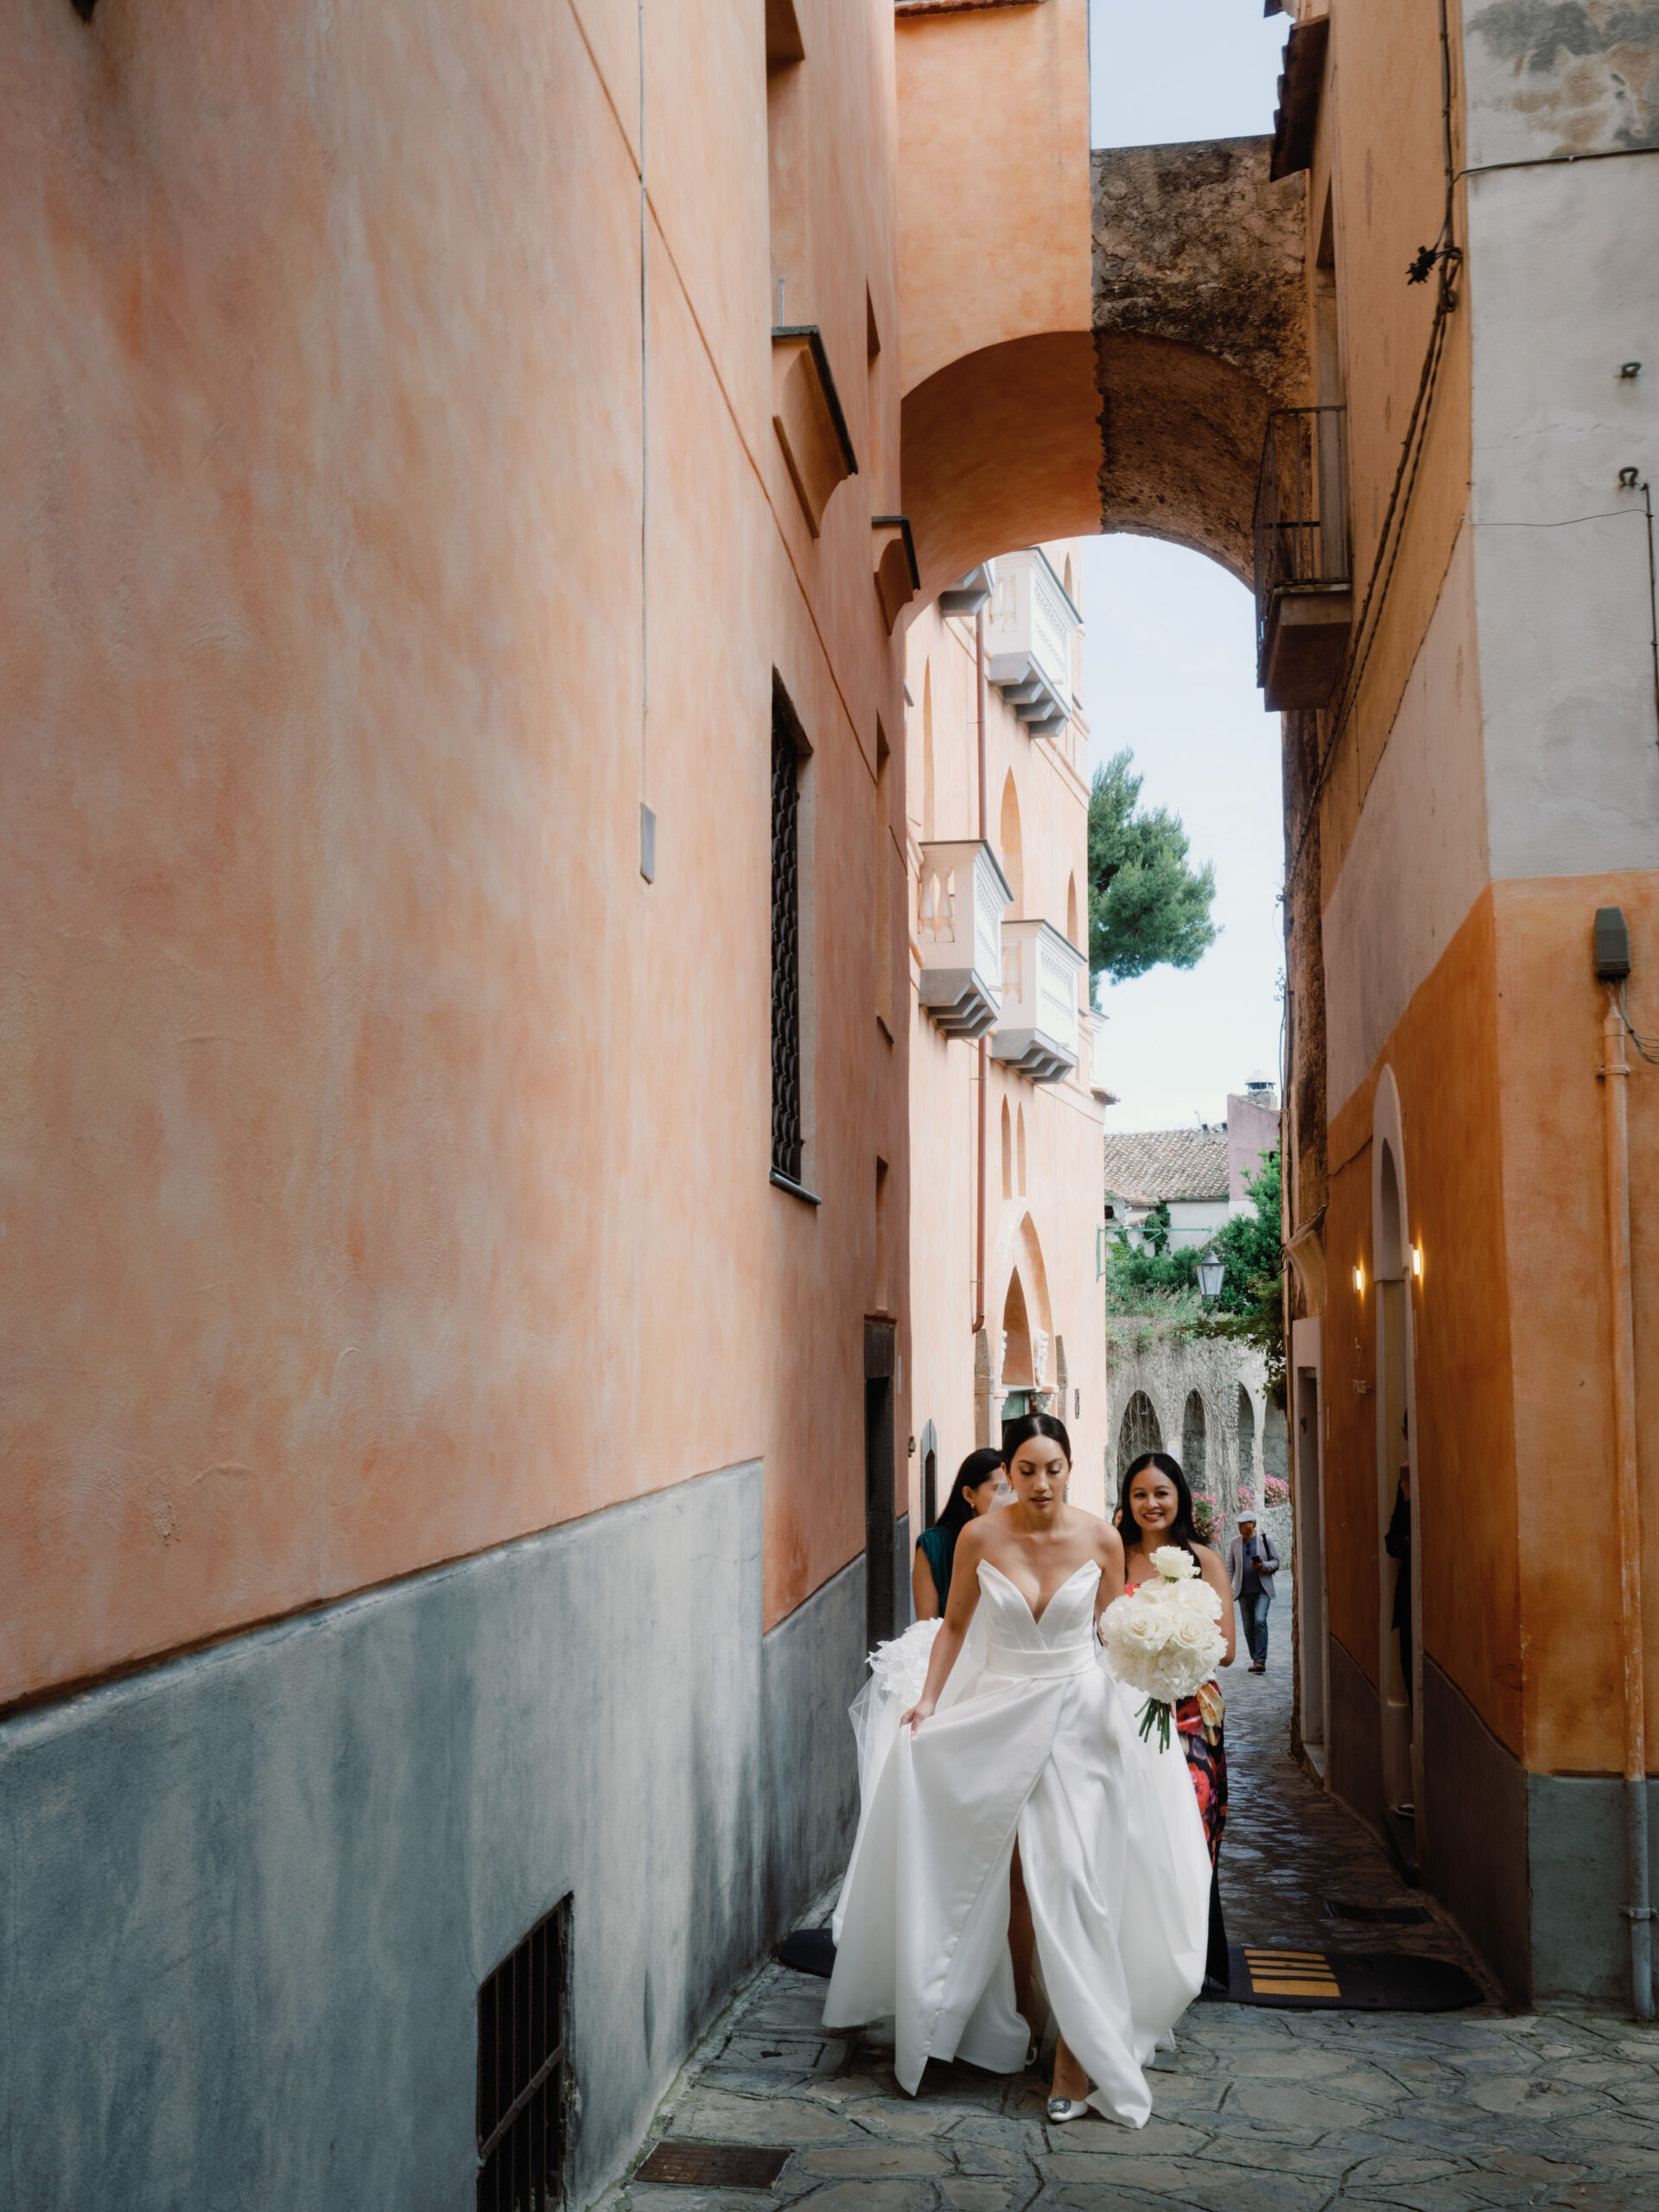 The bride is walking the narrow pathway in Italy. Editorial image by Jenny Fu Studio